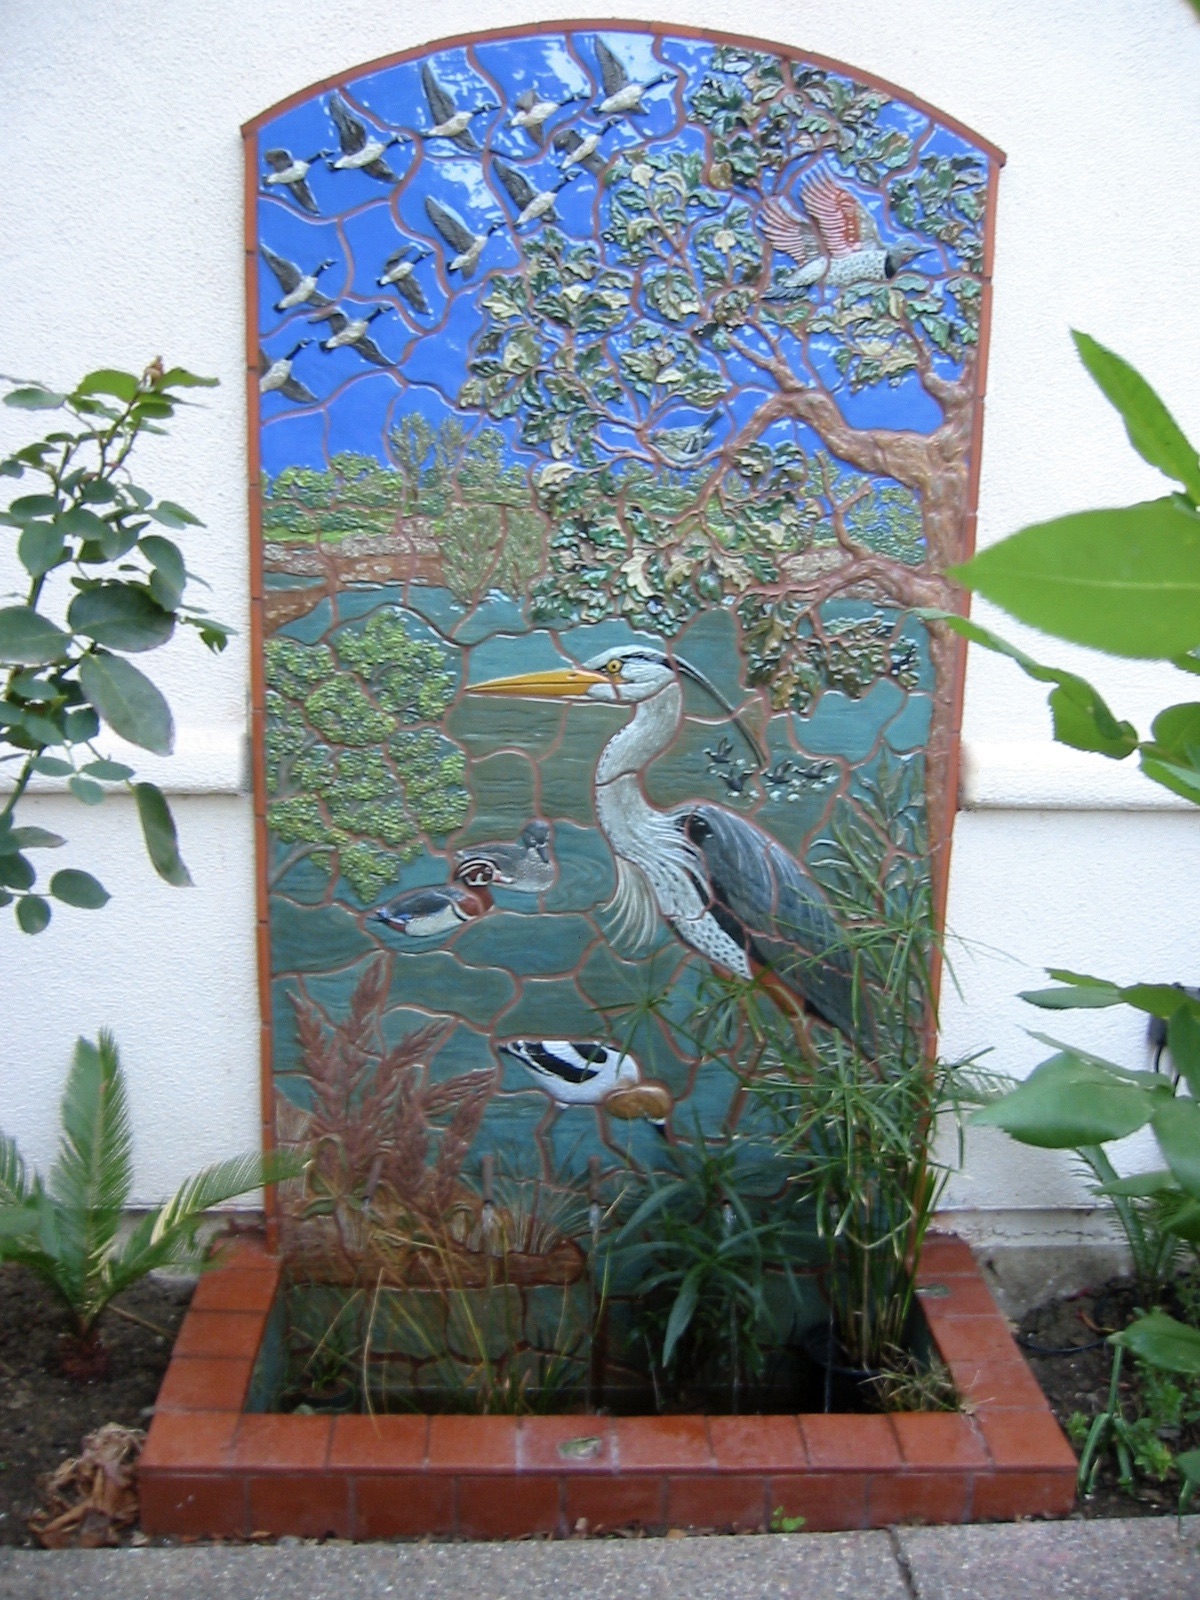 Ceramic Carved Fountain Mural with Heron and Waterfowl Design